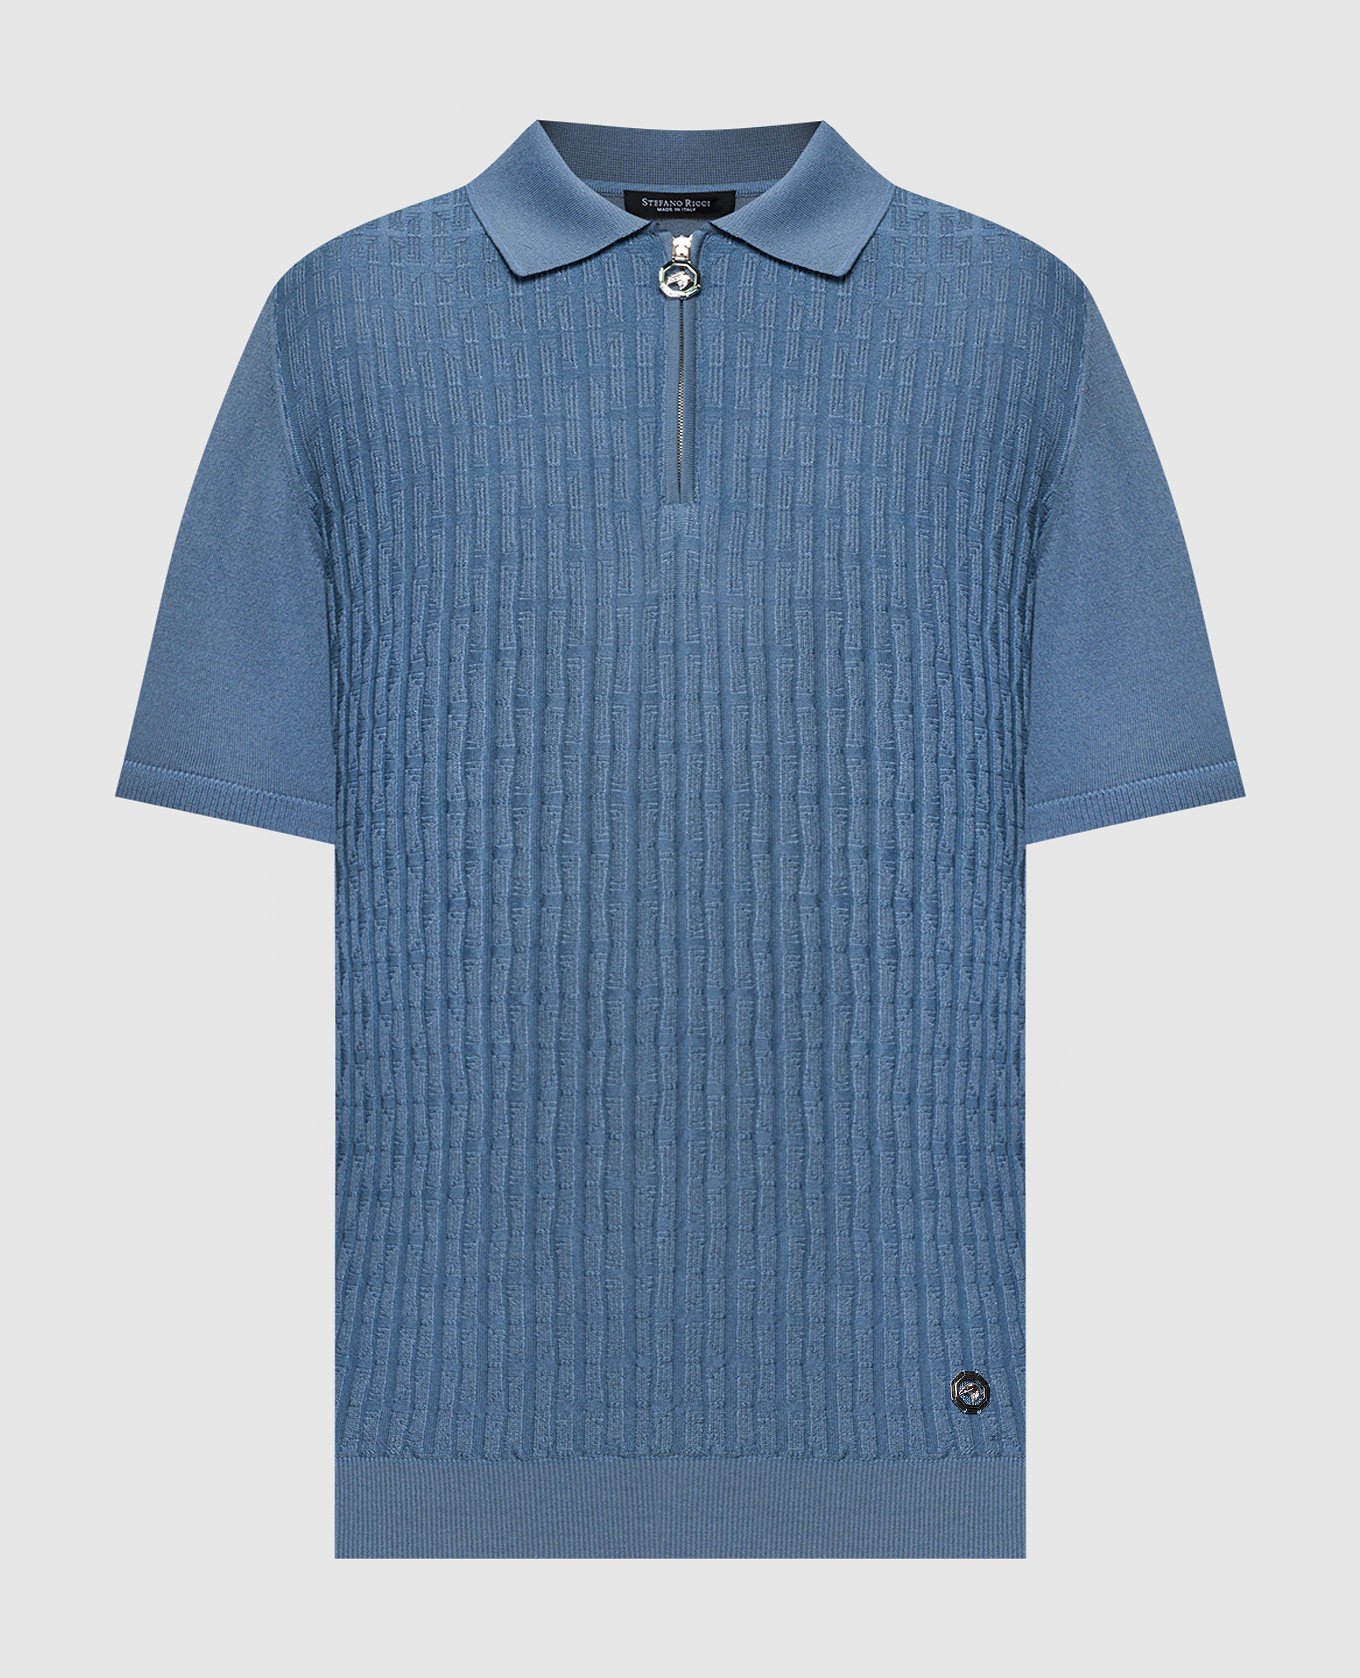 Blue polo shirt with silk in a textured pattern